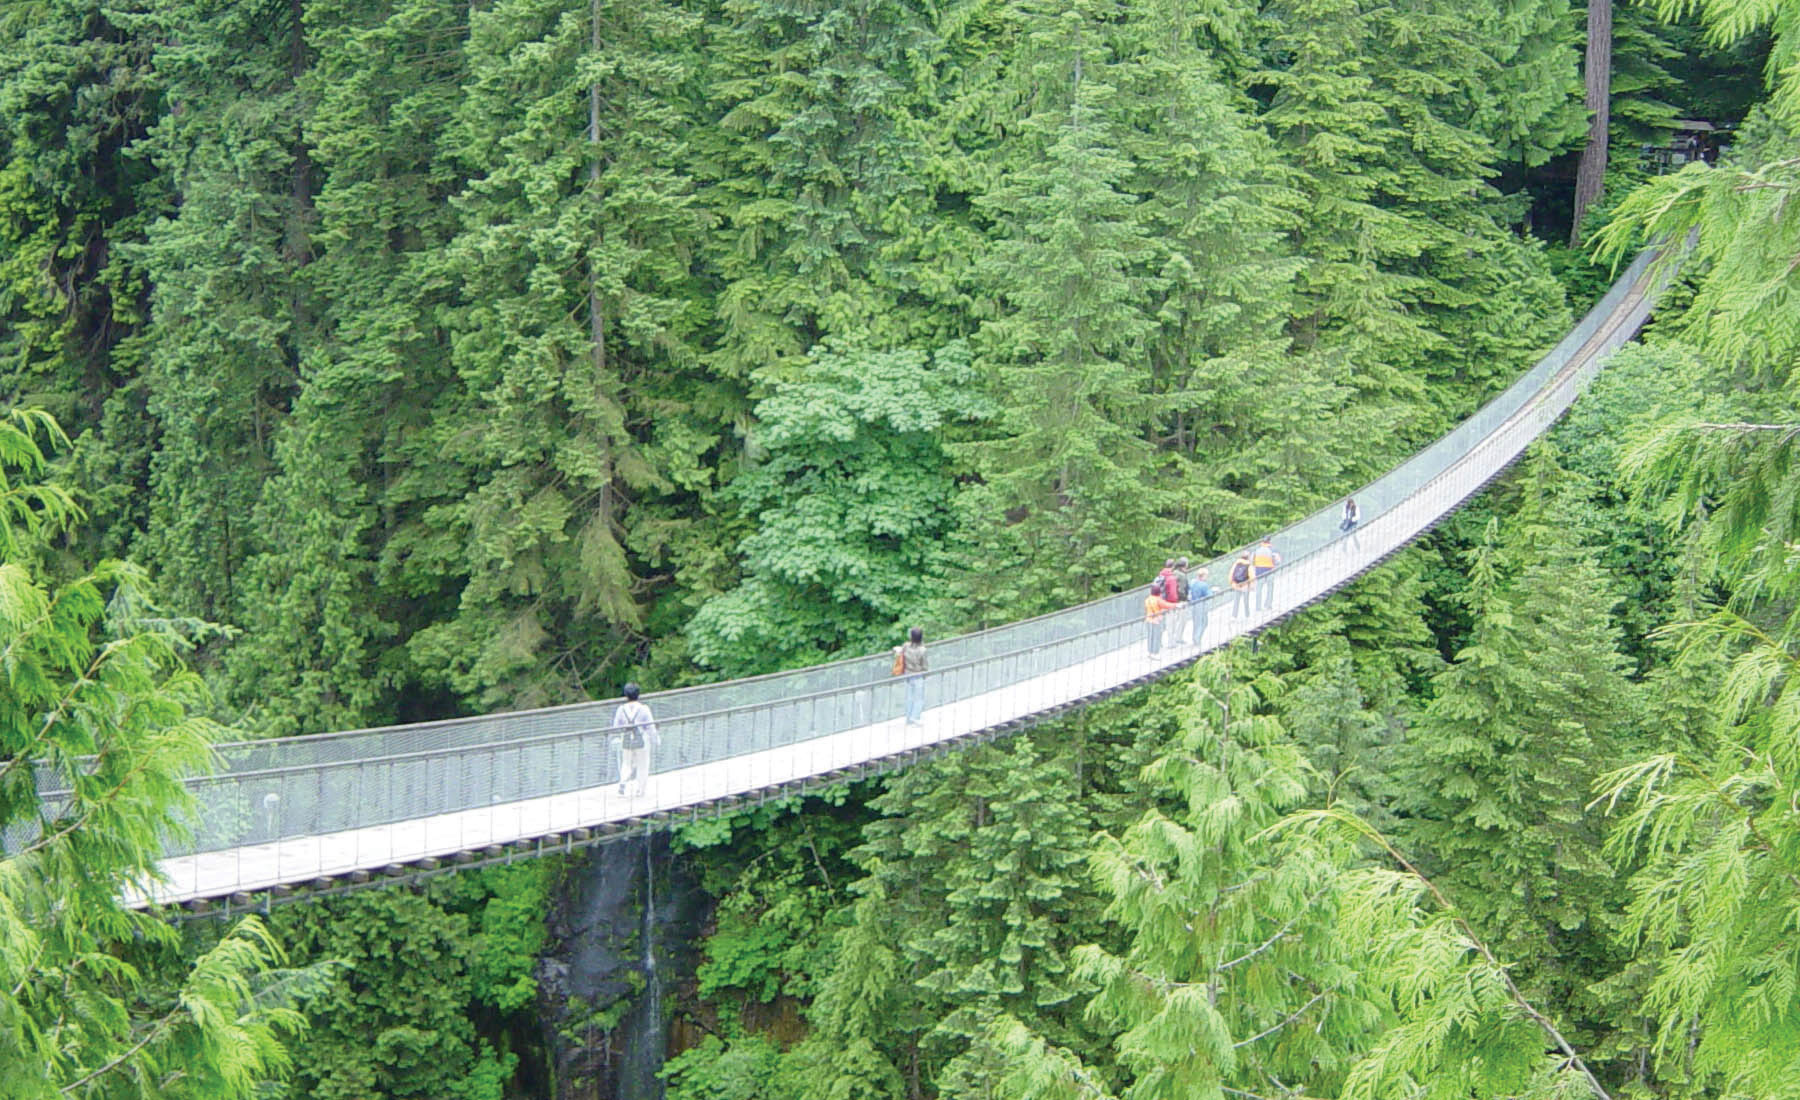 Figure 7.7 Arousal caused by the height of this bridge was misattributed as attraction by the men who were interviewed by an attractive woman as they crossed the bridge (http://wikimediafoundation.org/wiki/File:CapilanoBridge.jpg) by Leonard G (http://en.wikipedia.org/wiki/User:Leonard_G.)under CC SA (http://creativecommons.org/licenses/sa/1.0/)